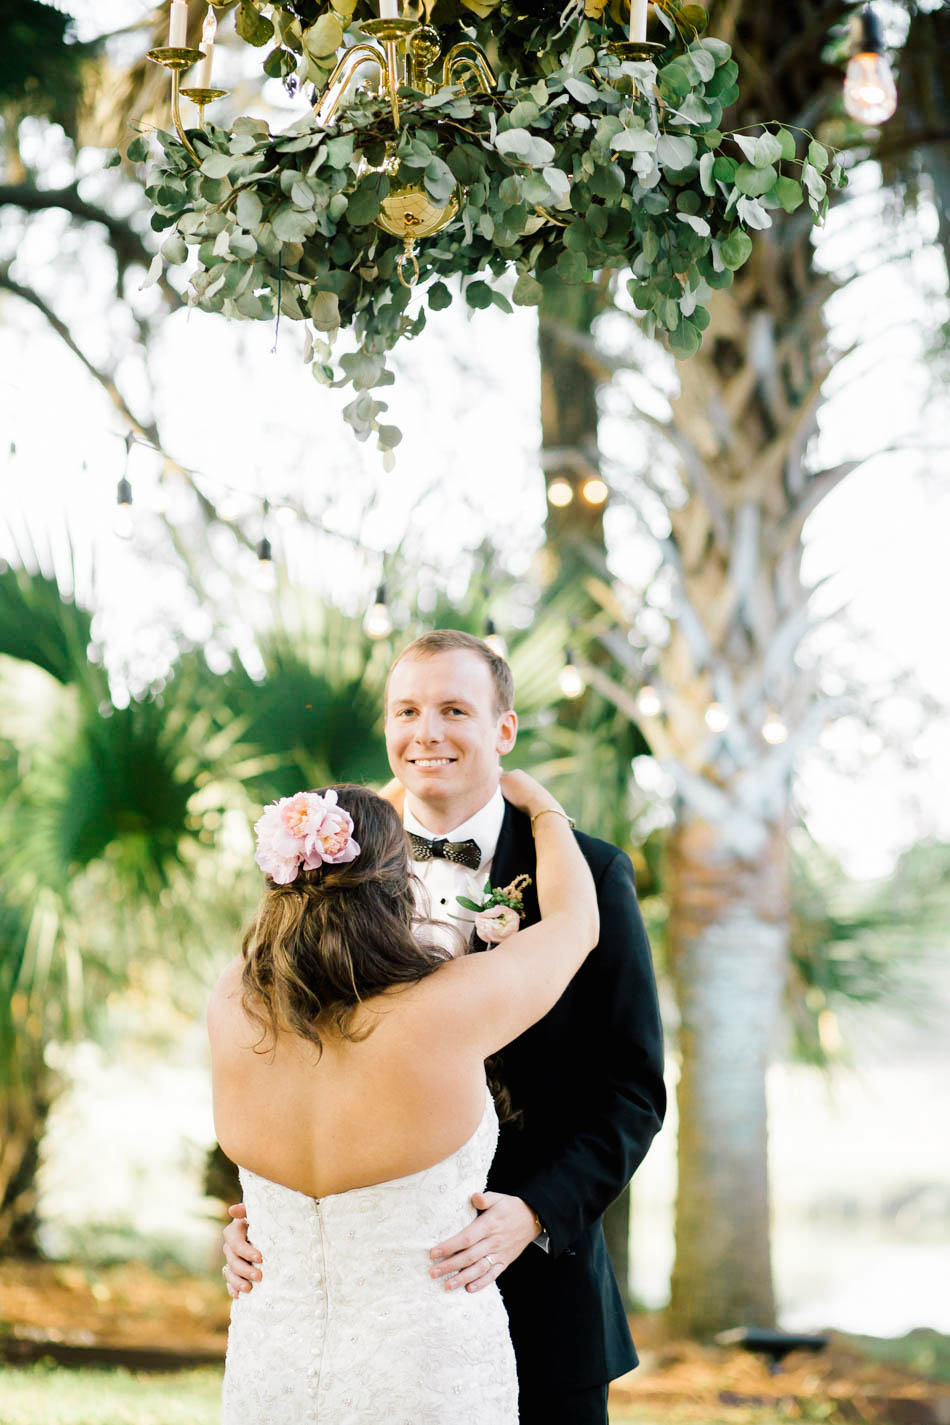 Bride and groom have their first dance, Wadmalaw Island, South Carolina Kate Timbers Photography. http://katetimbers.com #katetimbersphotography // Charleston Photography // Inspiration